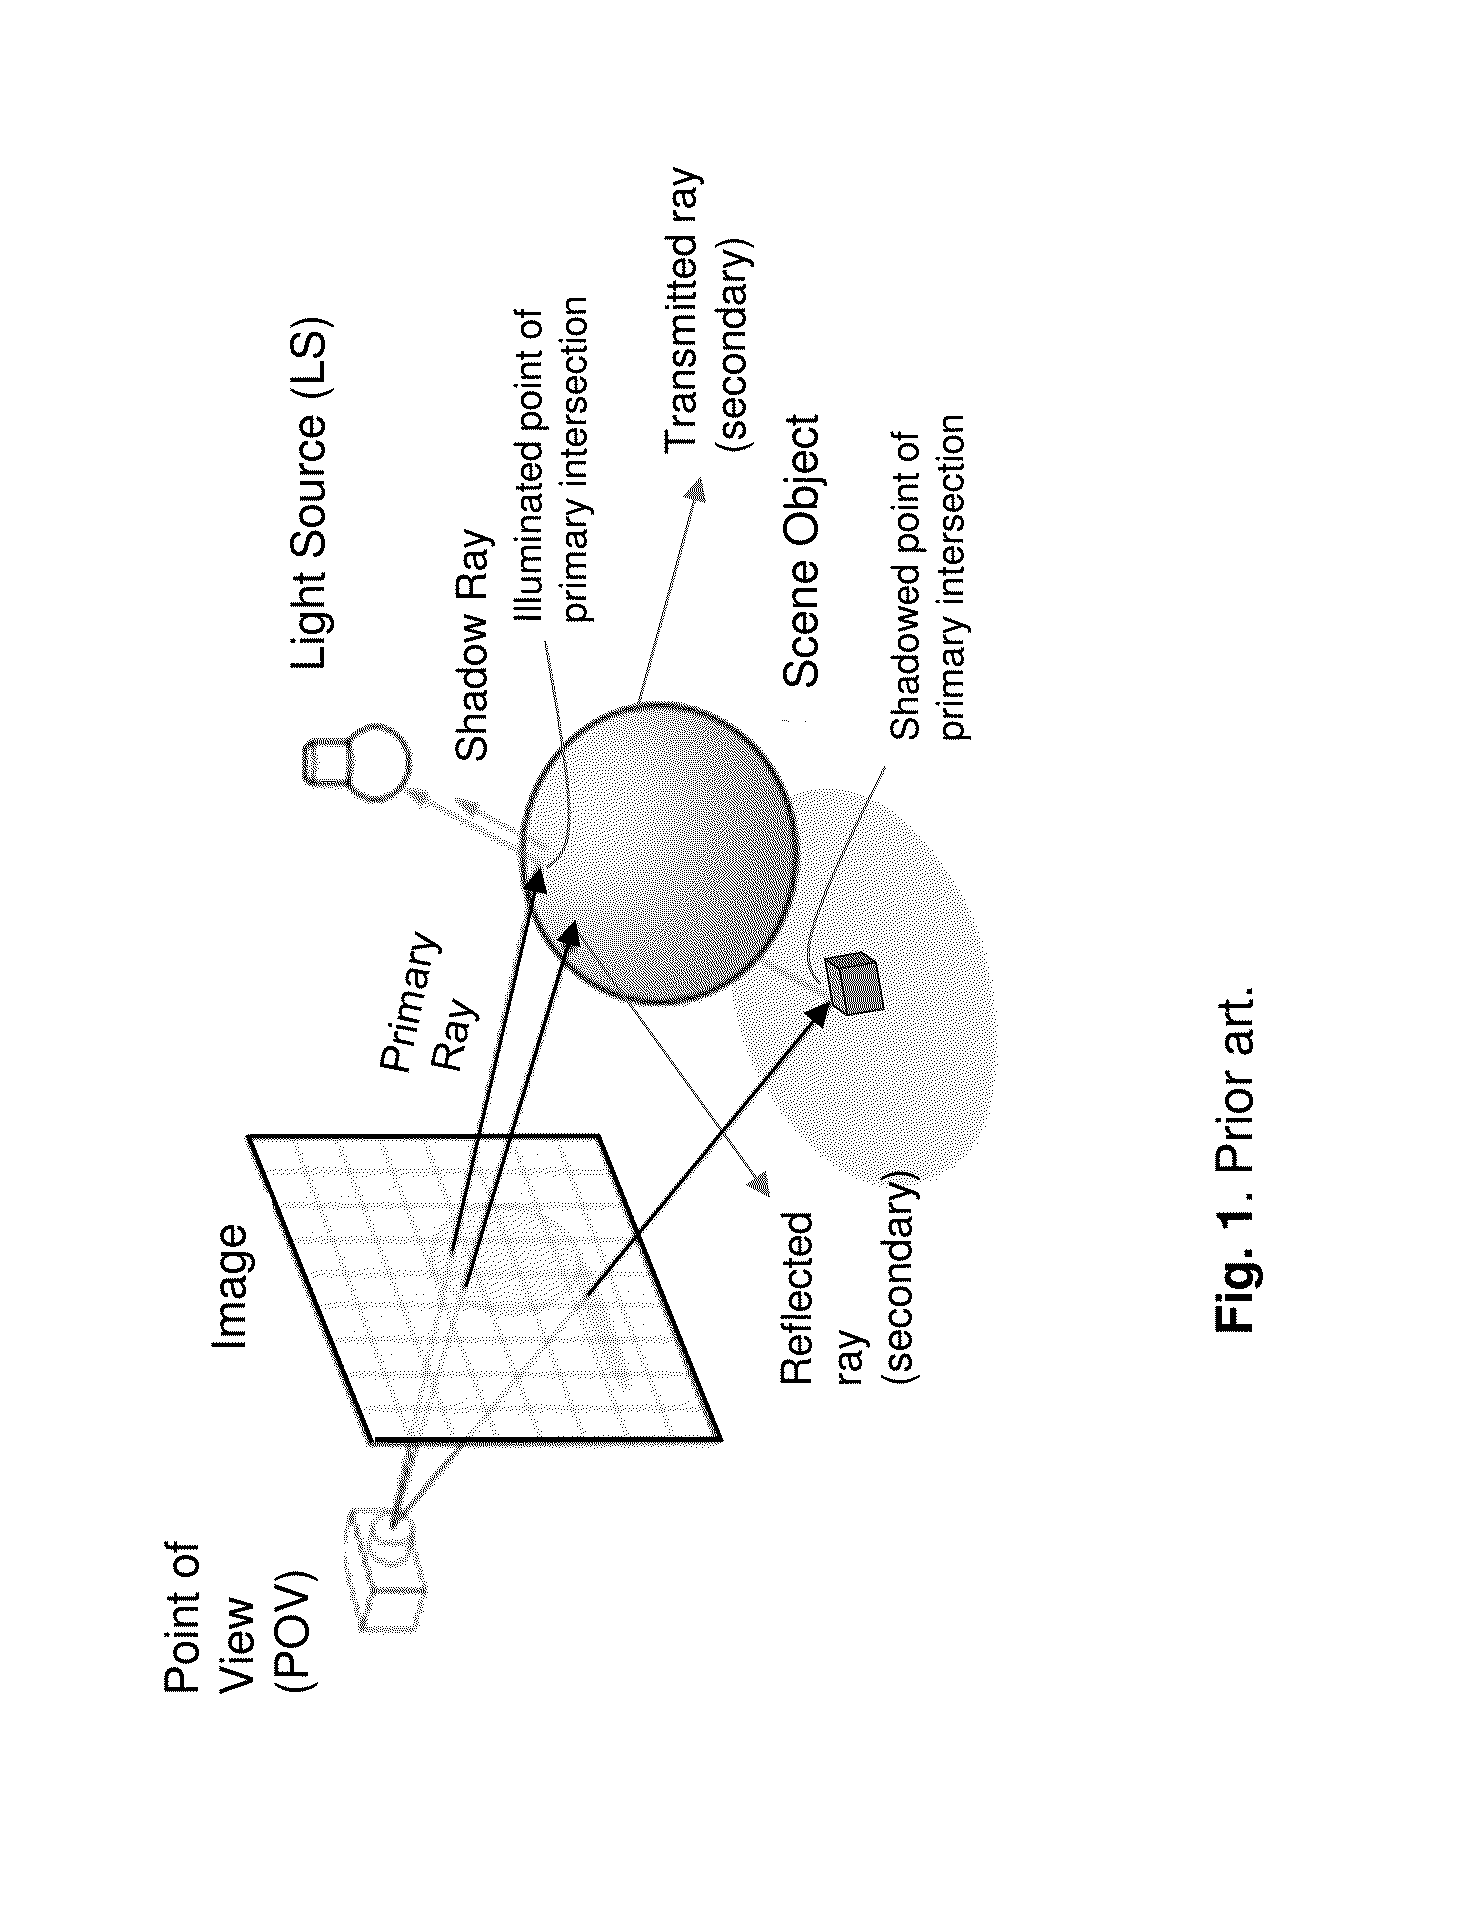 Method and System for a Separated Shadowing in Ray Tracing